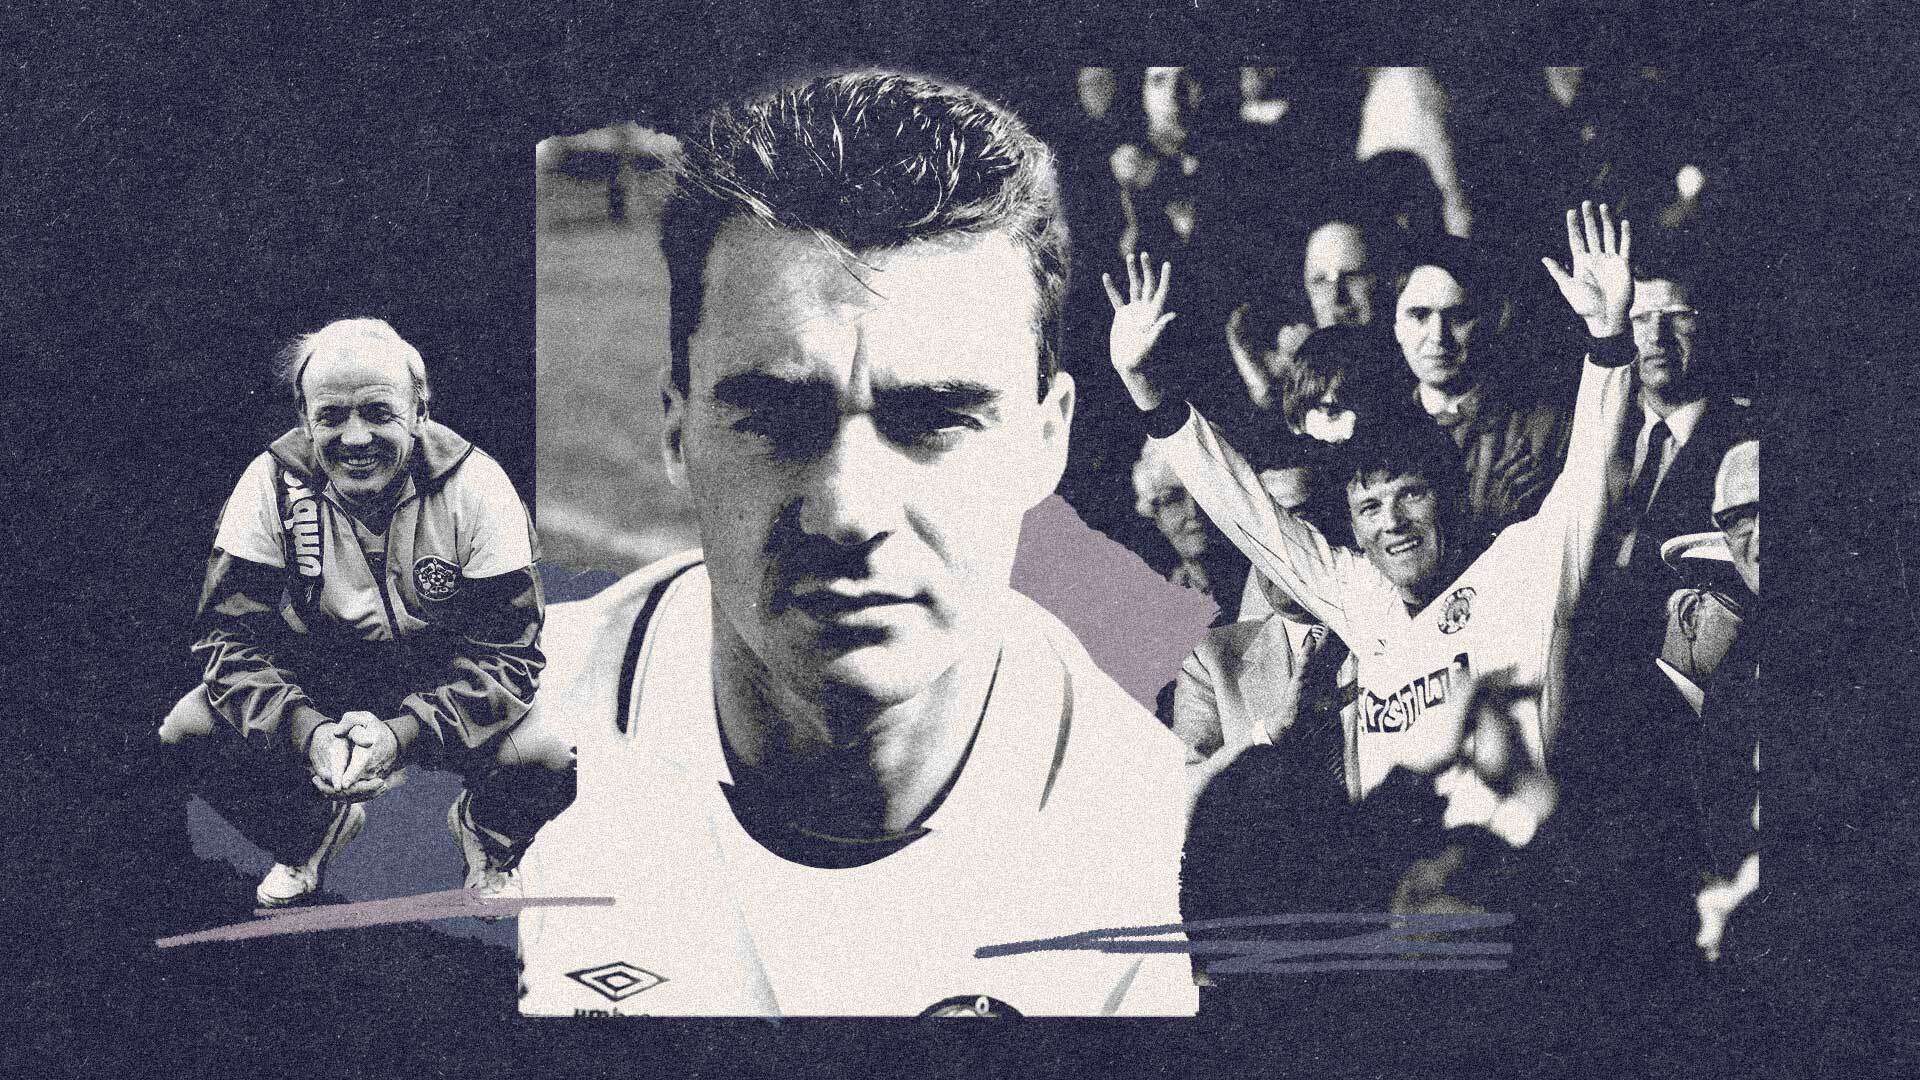 John Sheridan at Leeds, flanked in collage by his two mentors, Billy Bremner and Eddie Gray